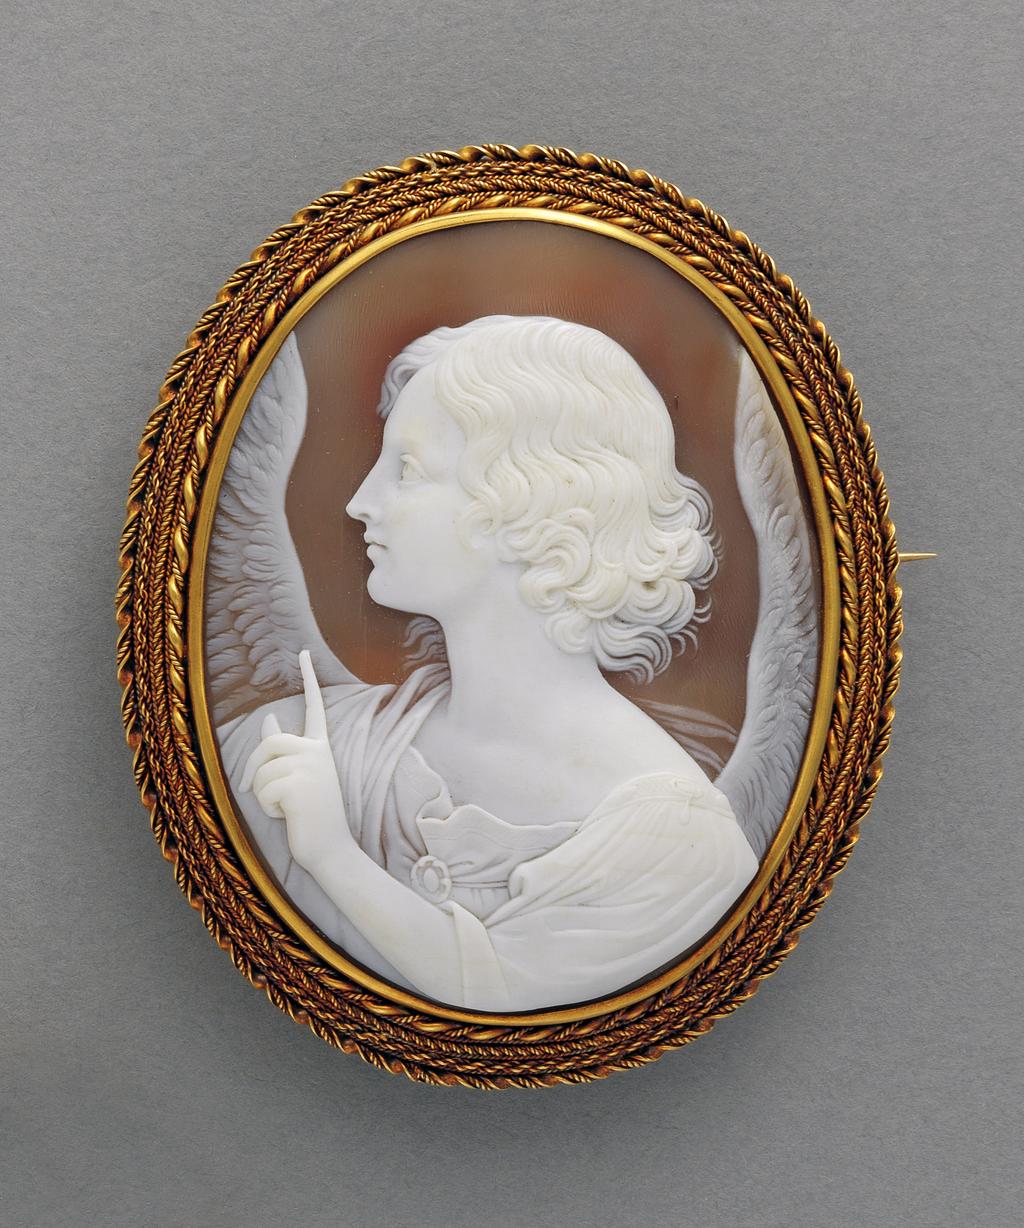 An image of Jewellery. Brooch. Shell cameo mounted in gold. Watherston & Brogden, England. Cameo bust of an angel in profile to the left with the index finger of its left hand raised, mounted in gold and surrounded by a border of four strands of gold ropework; pin-fastening across the back. In original red leather case (A), the lid of which is lined with white silk, printed in blue with the maker's name and adress: 'PARIS FIRST CLASS & LONDON PRIZE MEDALS/Watherston & Brogden/ Goldsmiths/ MANUFACTORY/16 Henrietta St/Covent Garden.WC/LONDON'. Gold, shell, height 7.21 cm, width 5.9 cm, 1862-1864. Victorian. Acquisition Credit: Given by Mrs J. Hull Grundy.